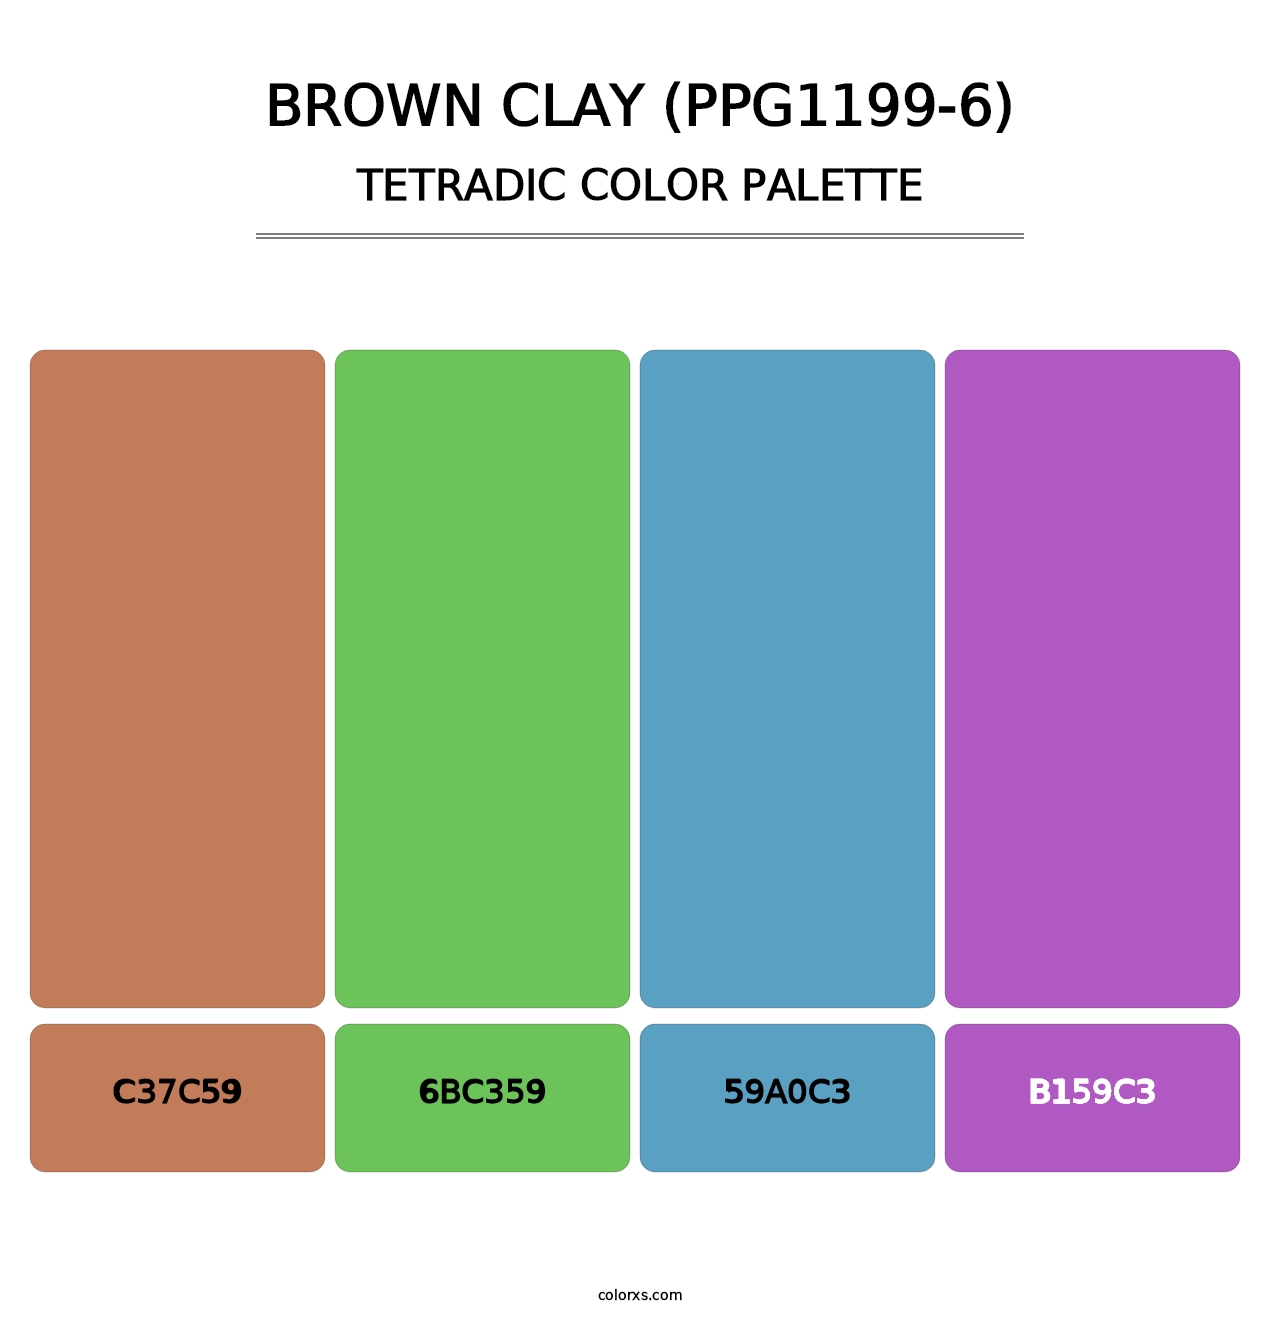 Brown Clay (PPG1199-6) - Tetradic Color Palette